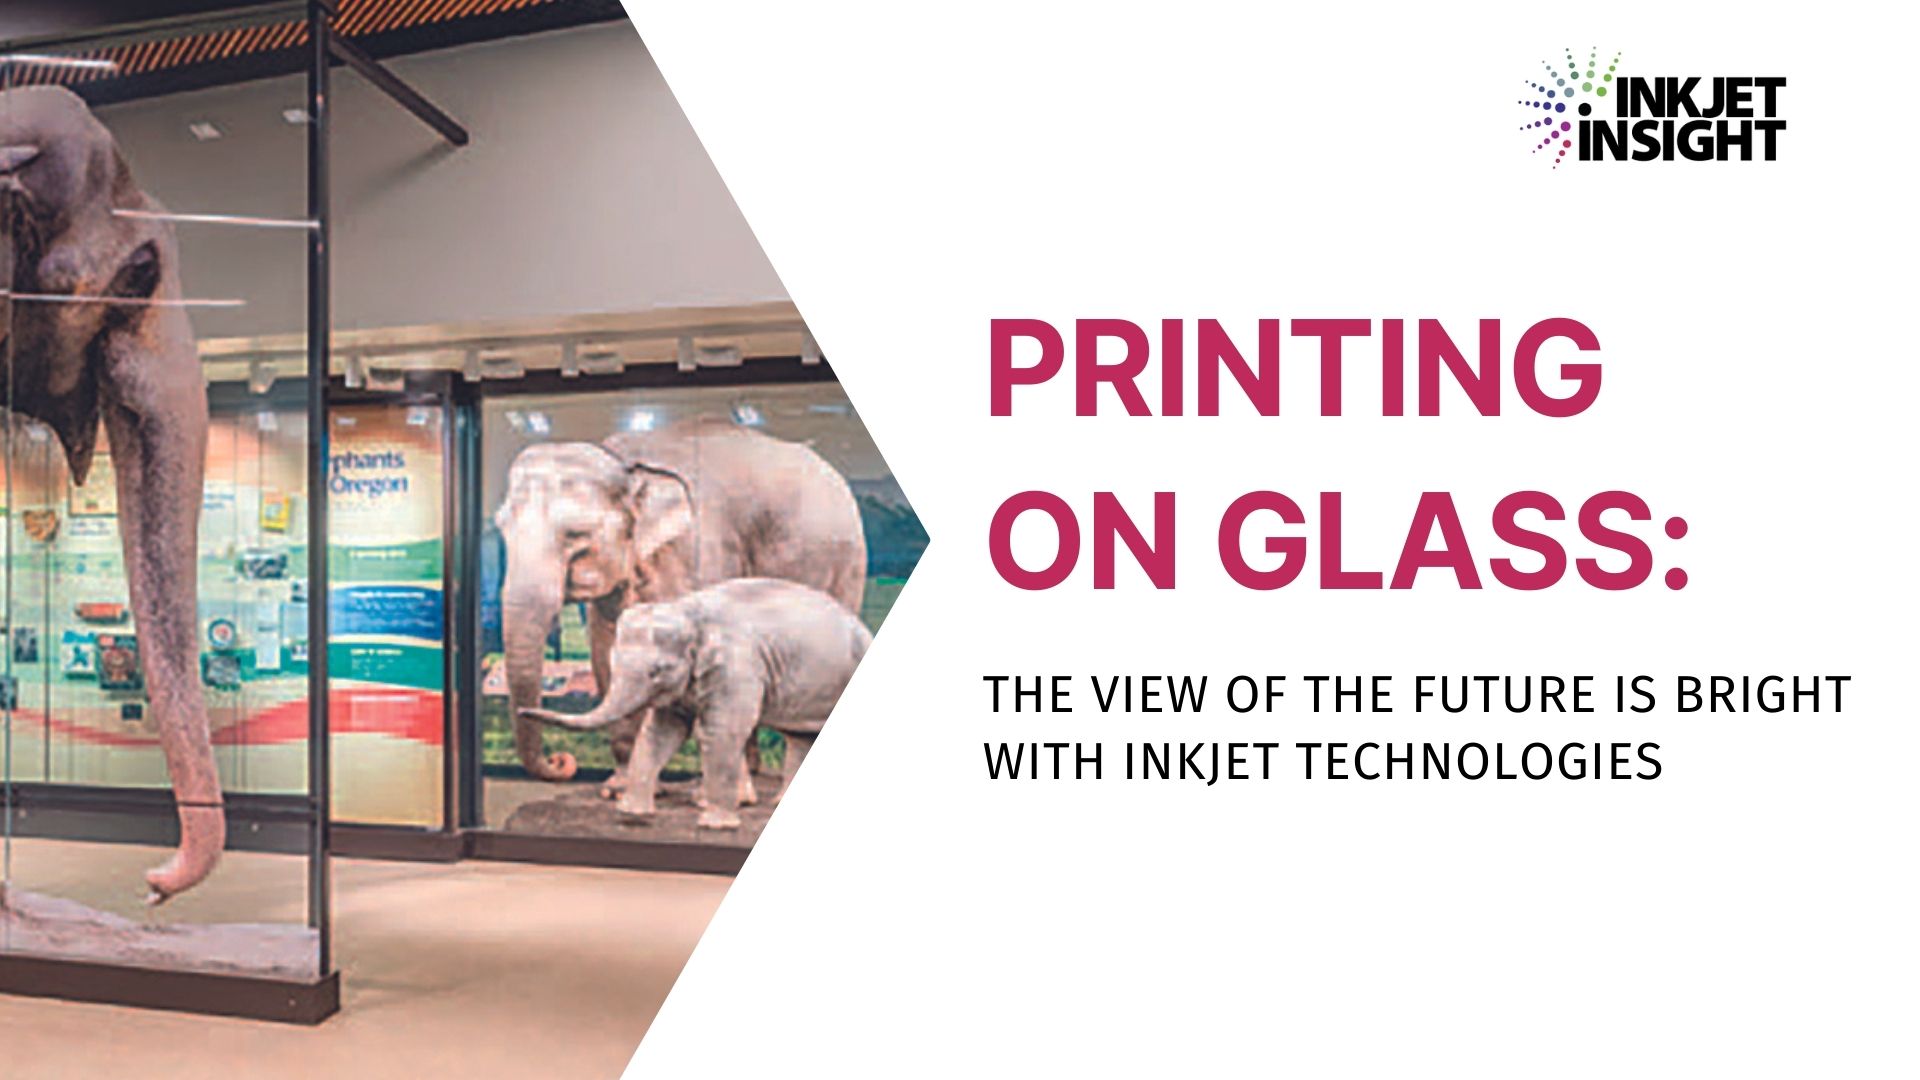 Featured image for “Printing On Glass: The View of the Future Is Bright with Inkjet Technologies”